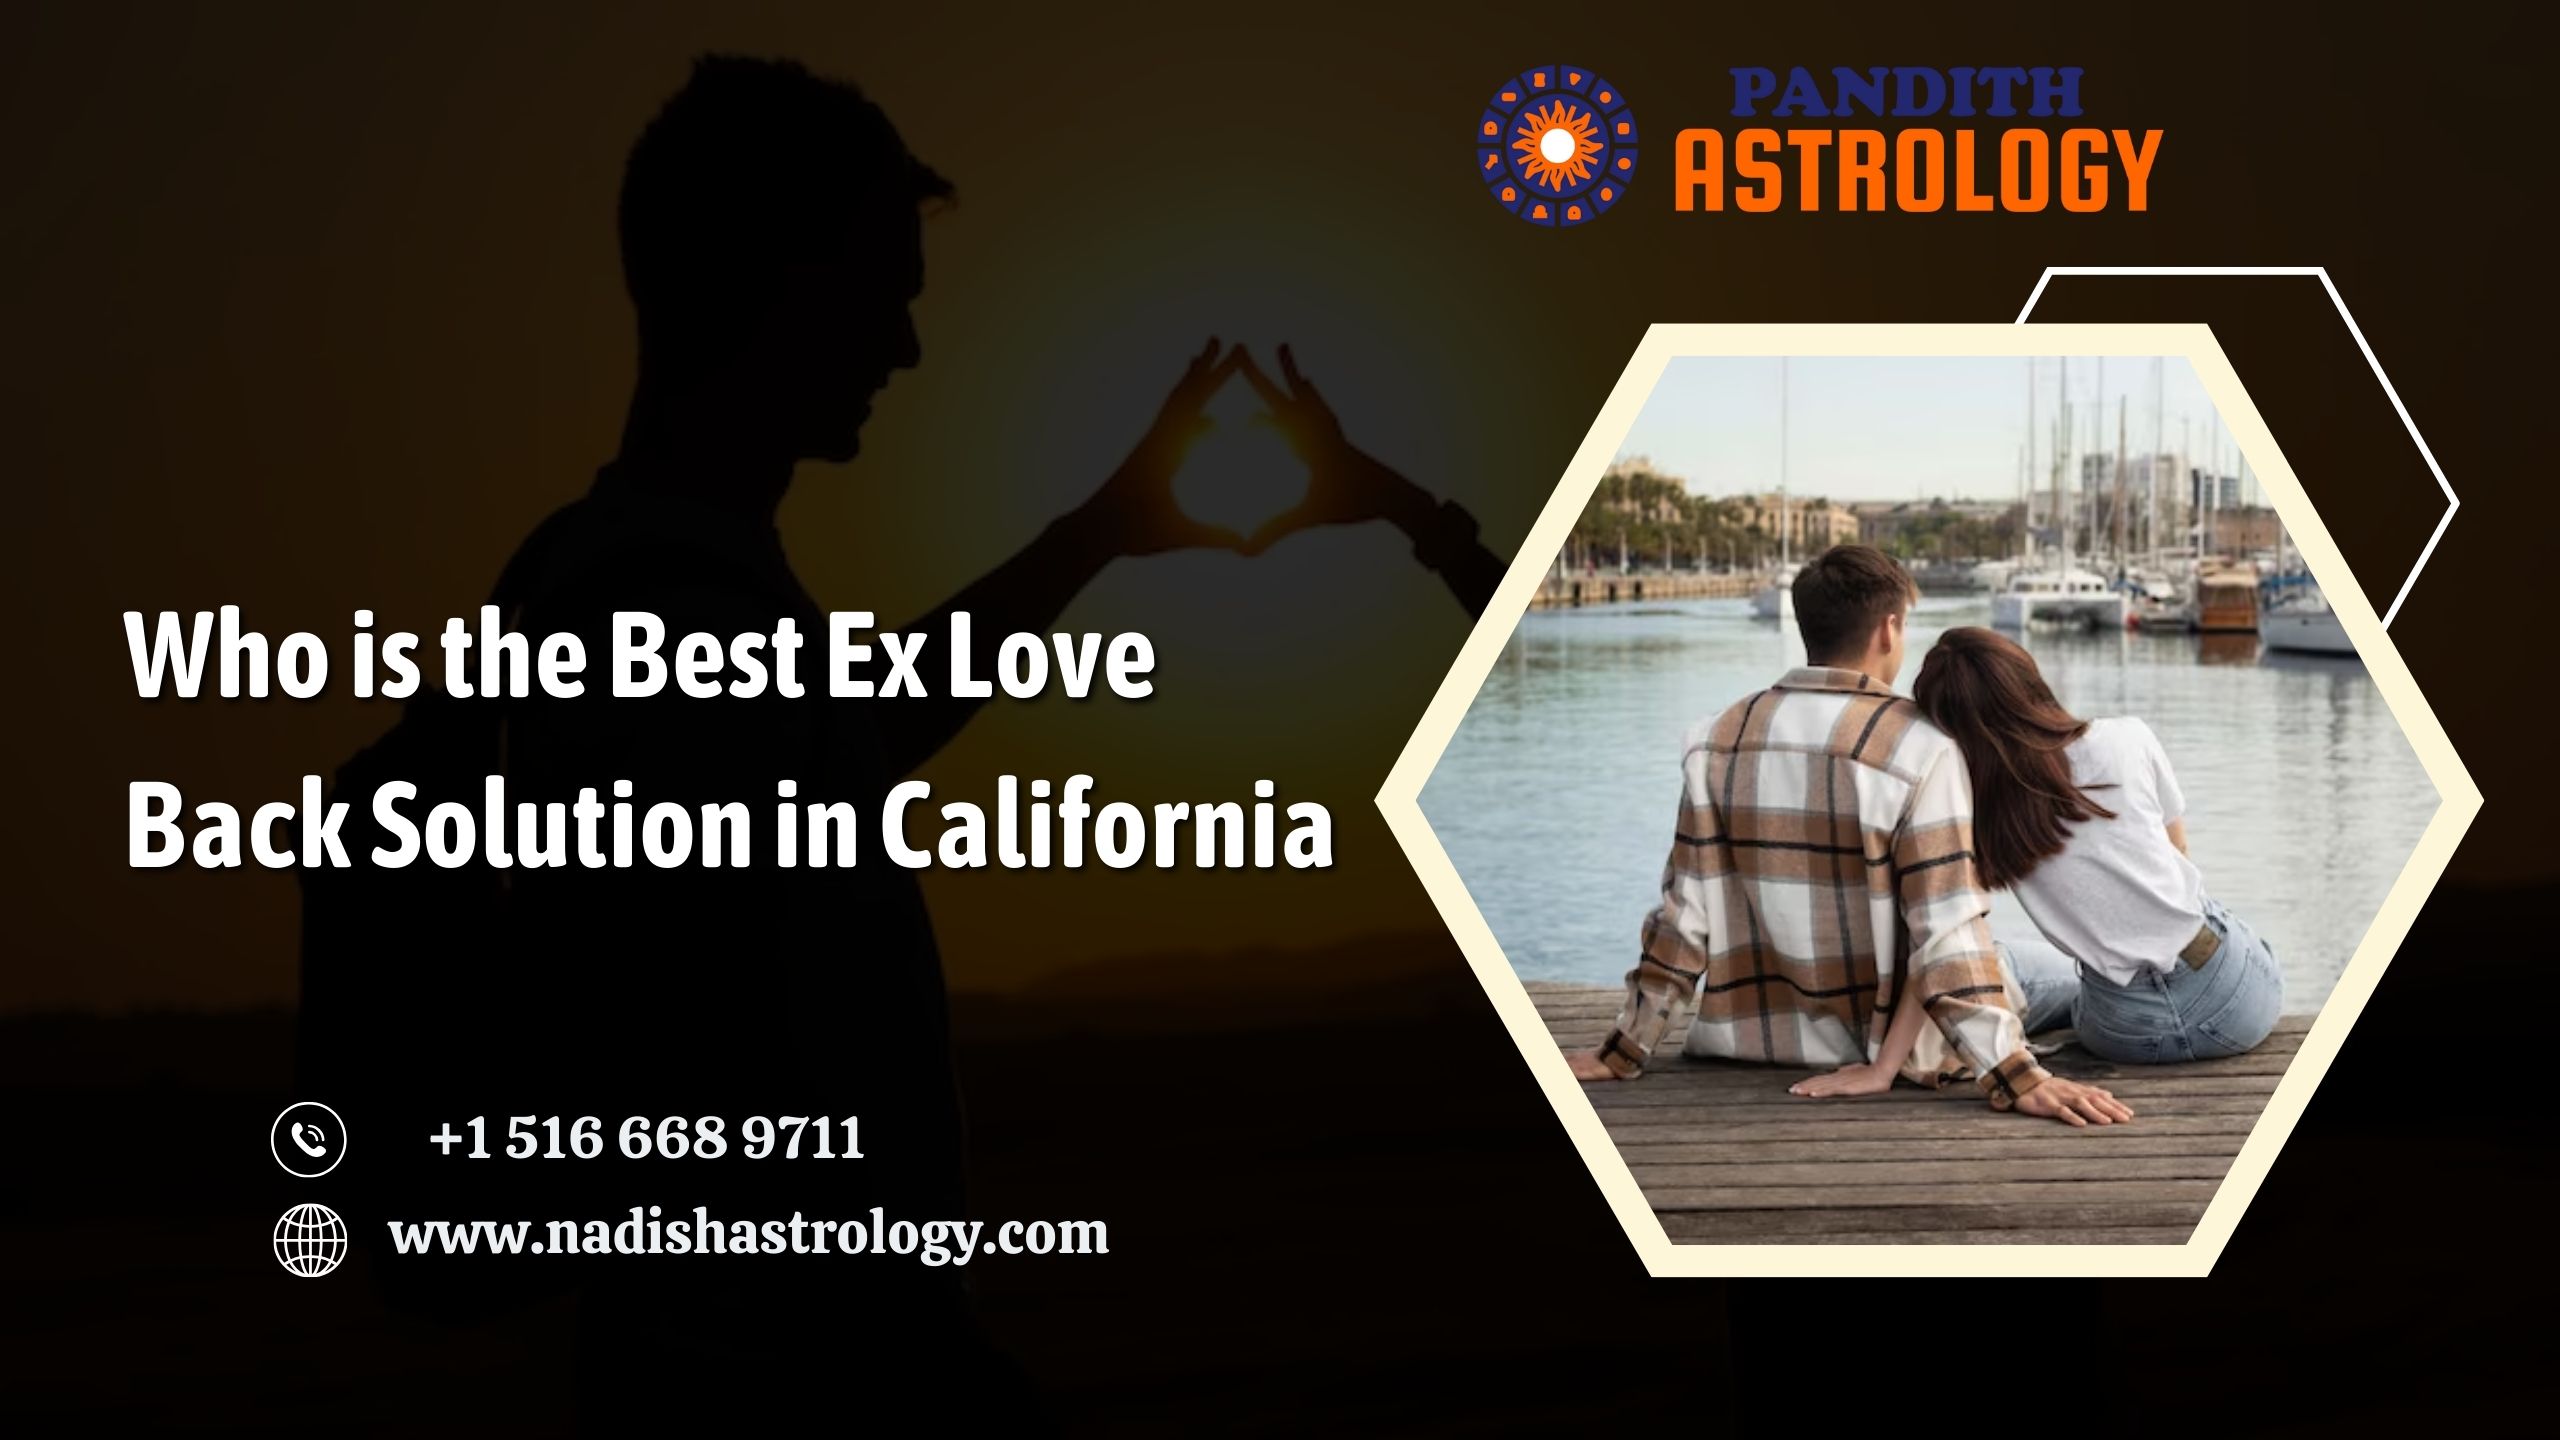 Who is the Best Ex Love Back Solution in California